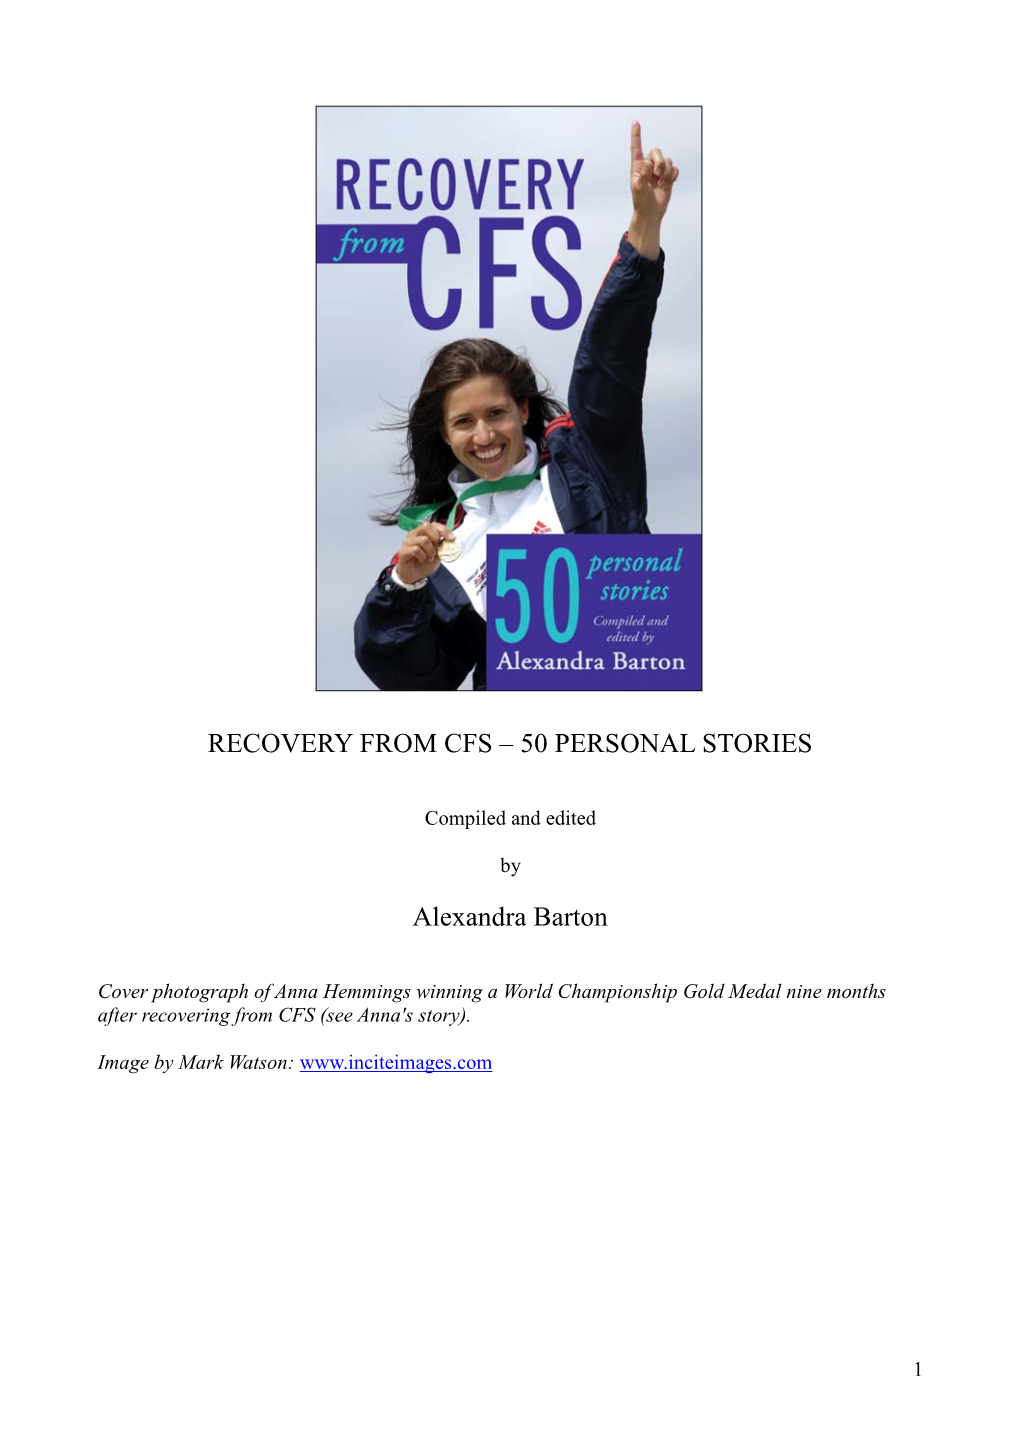 RECOVERY from CFS – 50 PERSONAL STORIES Alexandra